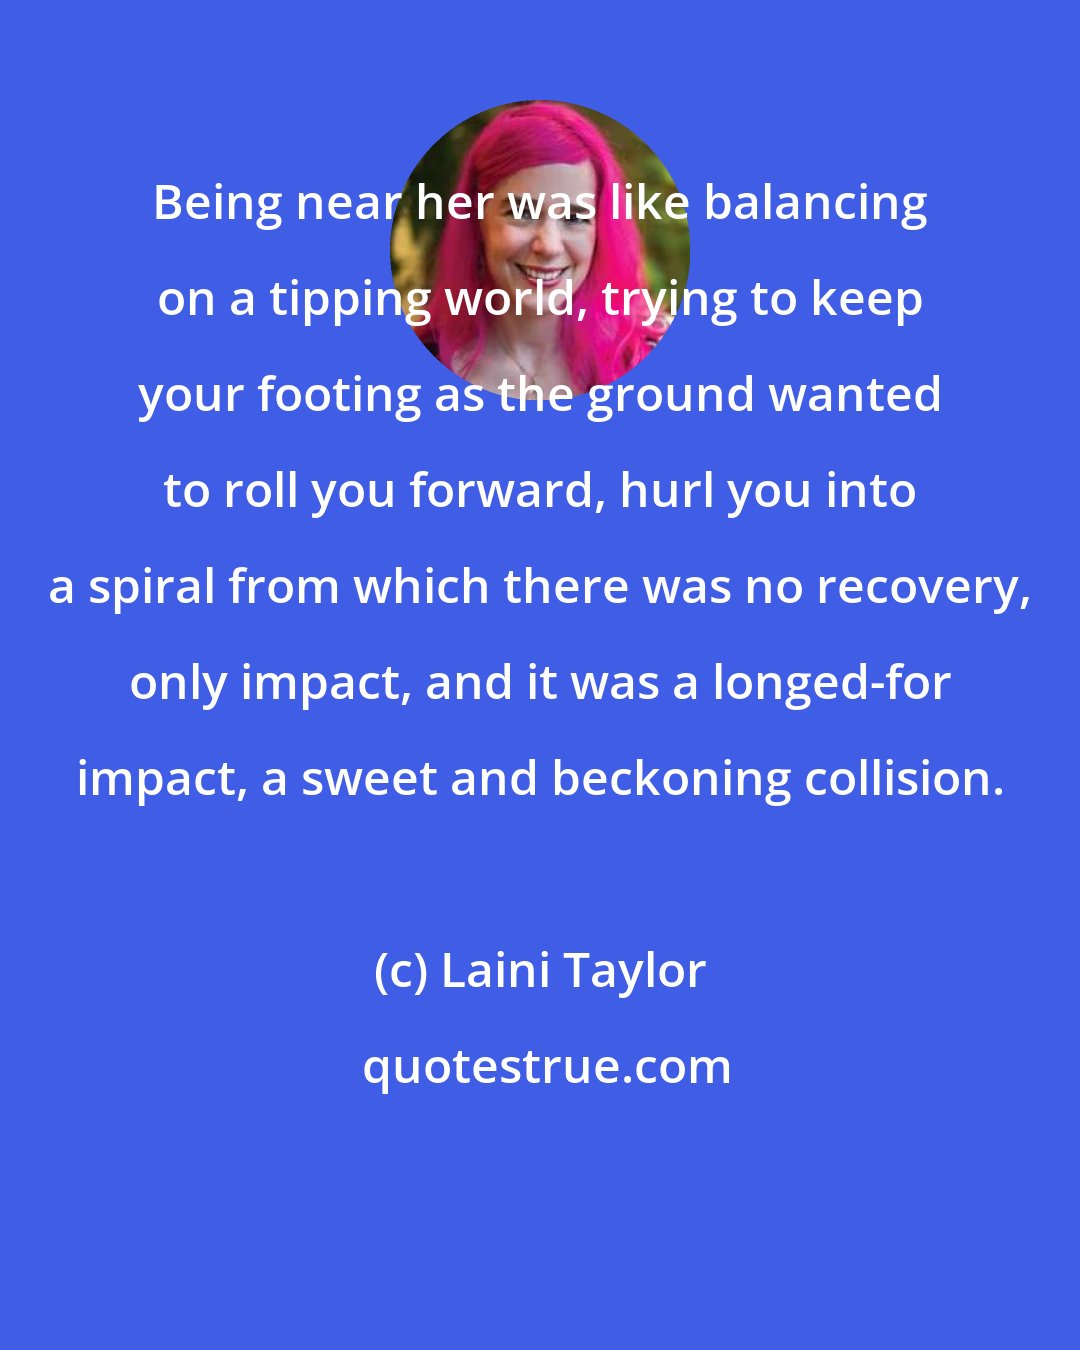 Laini Taylor: Being near her was like balancing on a tipping world, trying to keep your footing as the ground wanted to roll you forward, hurl you into a spiral from which there was no recovery, only impact, and it was a longed-for impact, a sweet and beckoning collision.